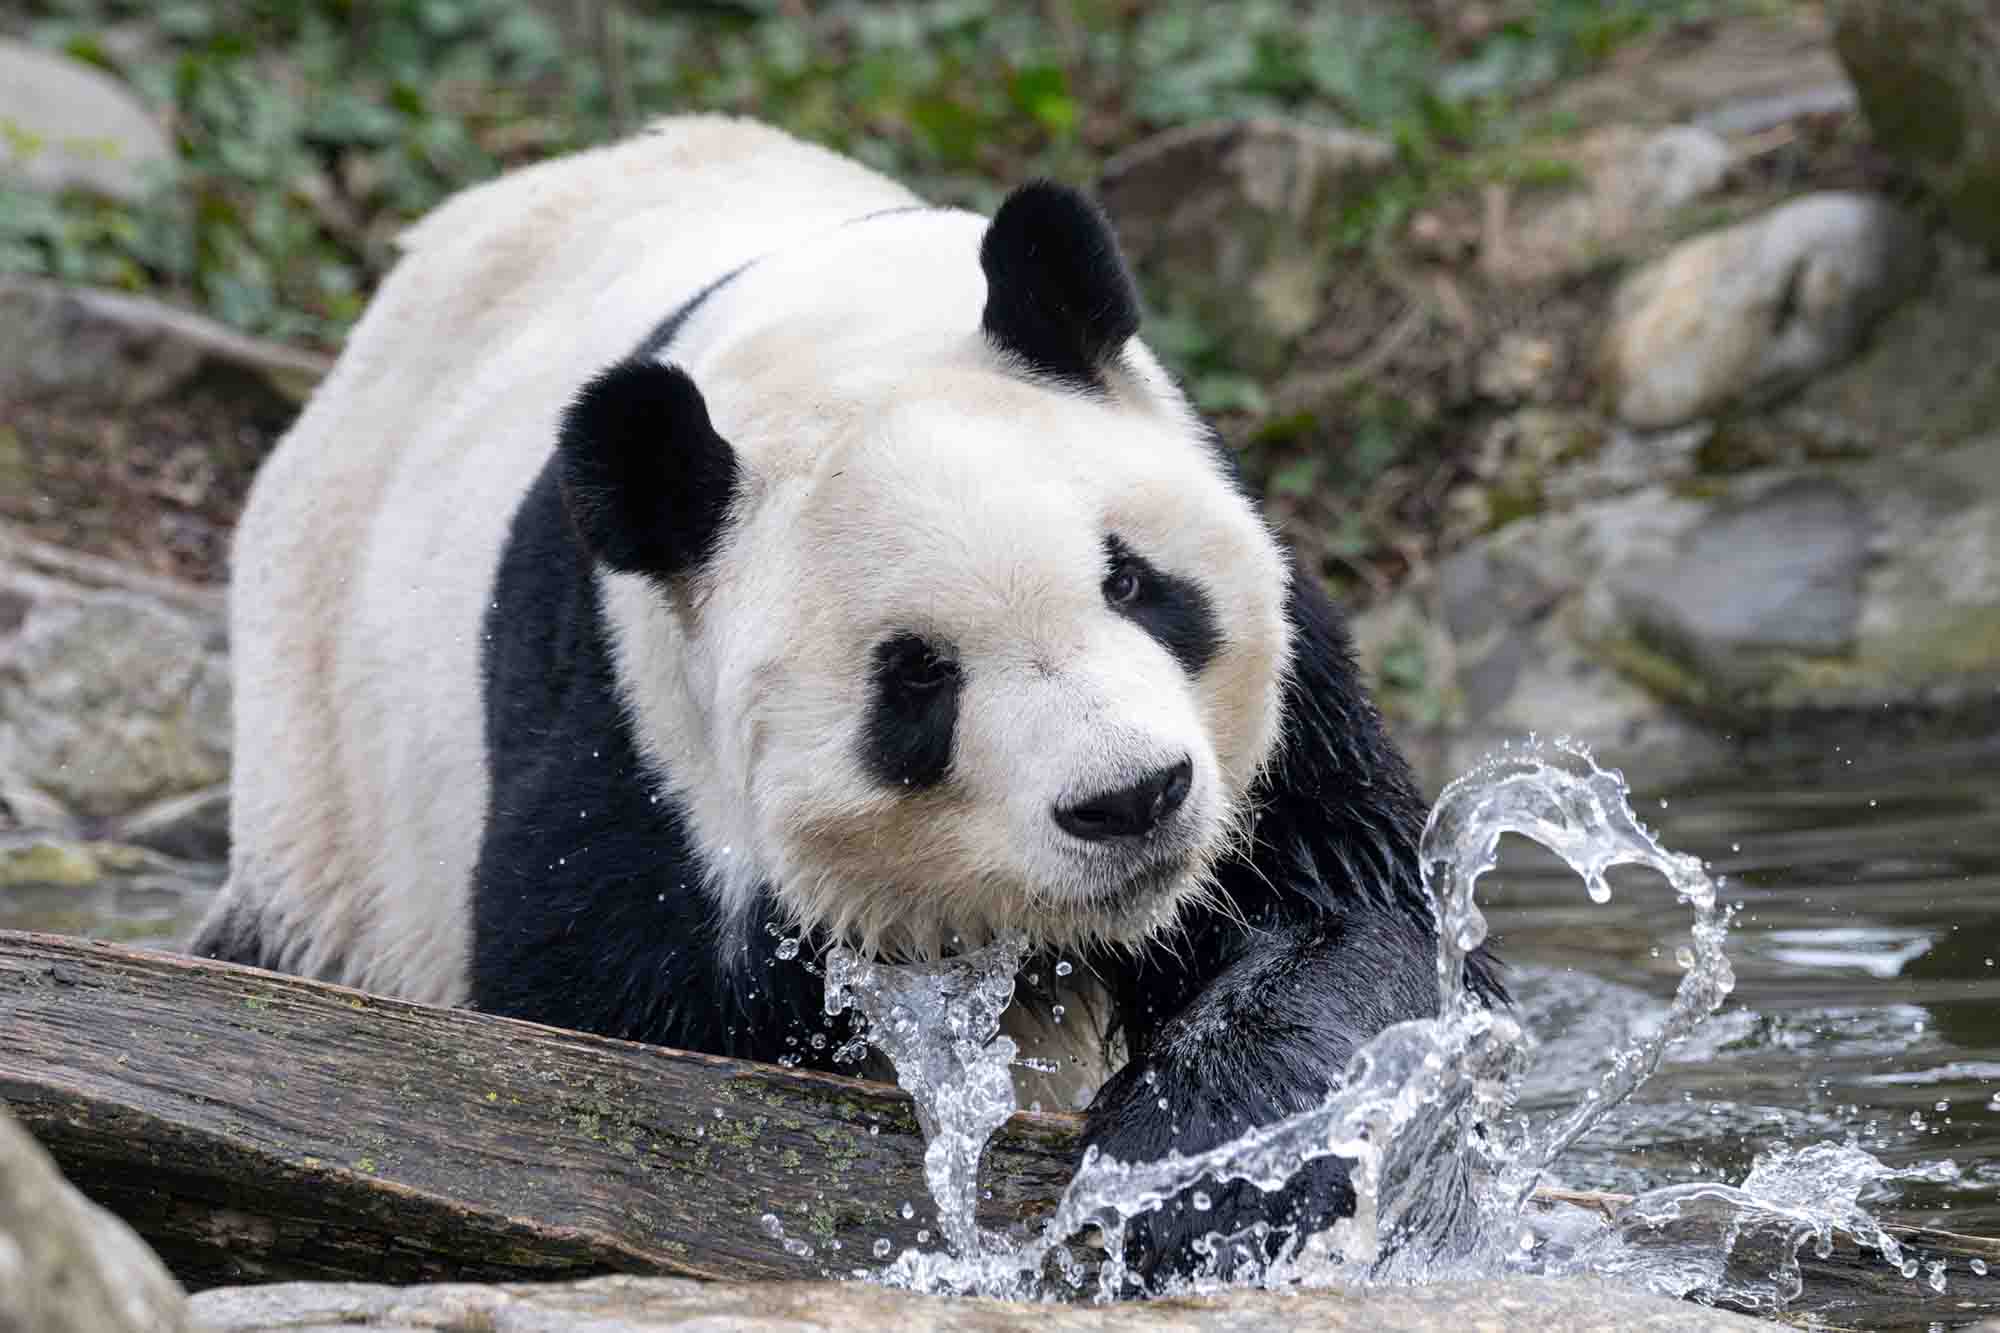 World’s Oldest Zoo To Welcome New Panda Couple After Deal With China